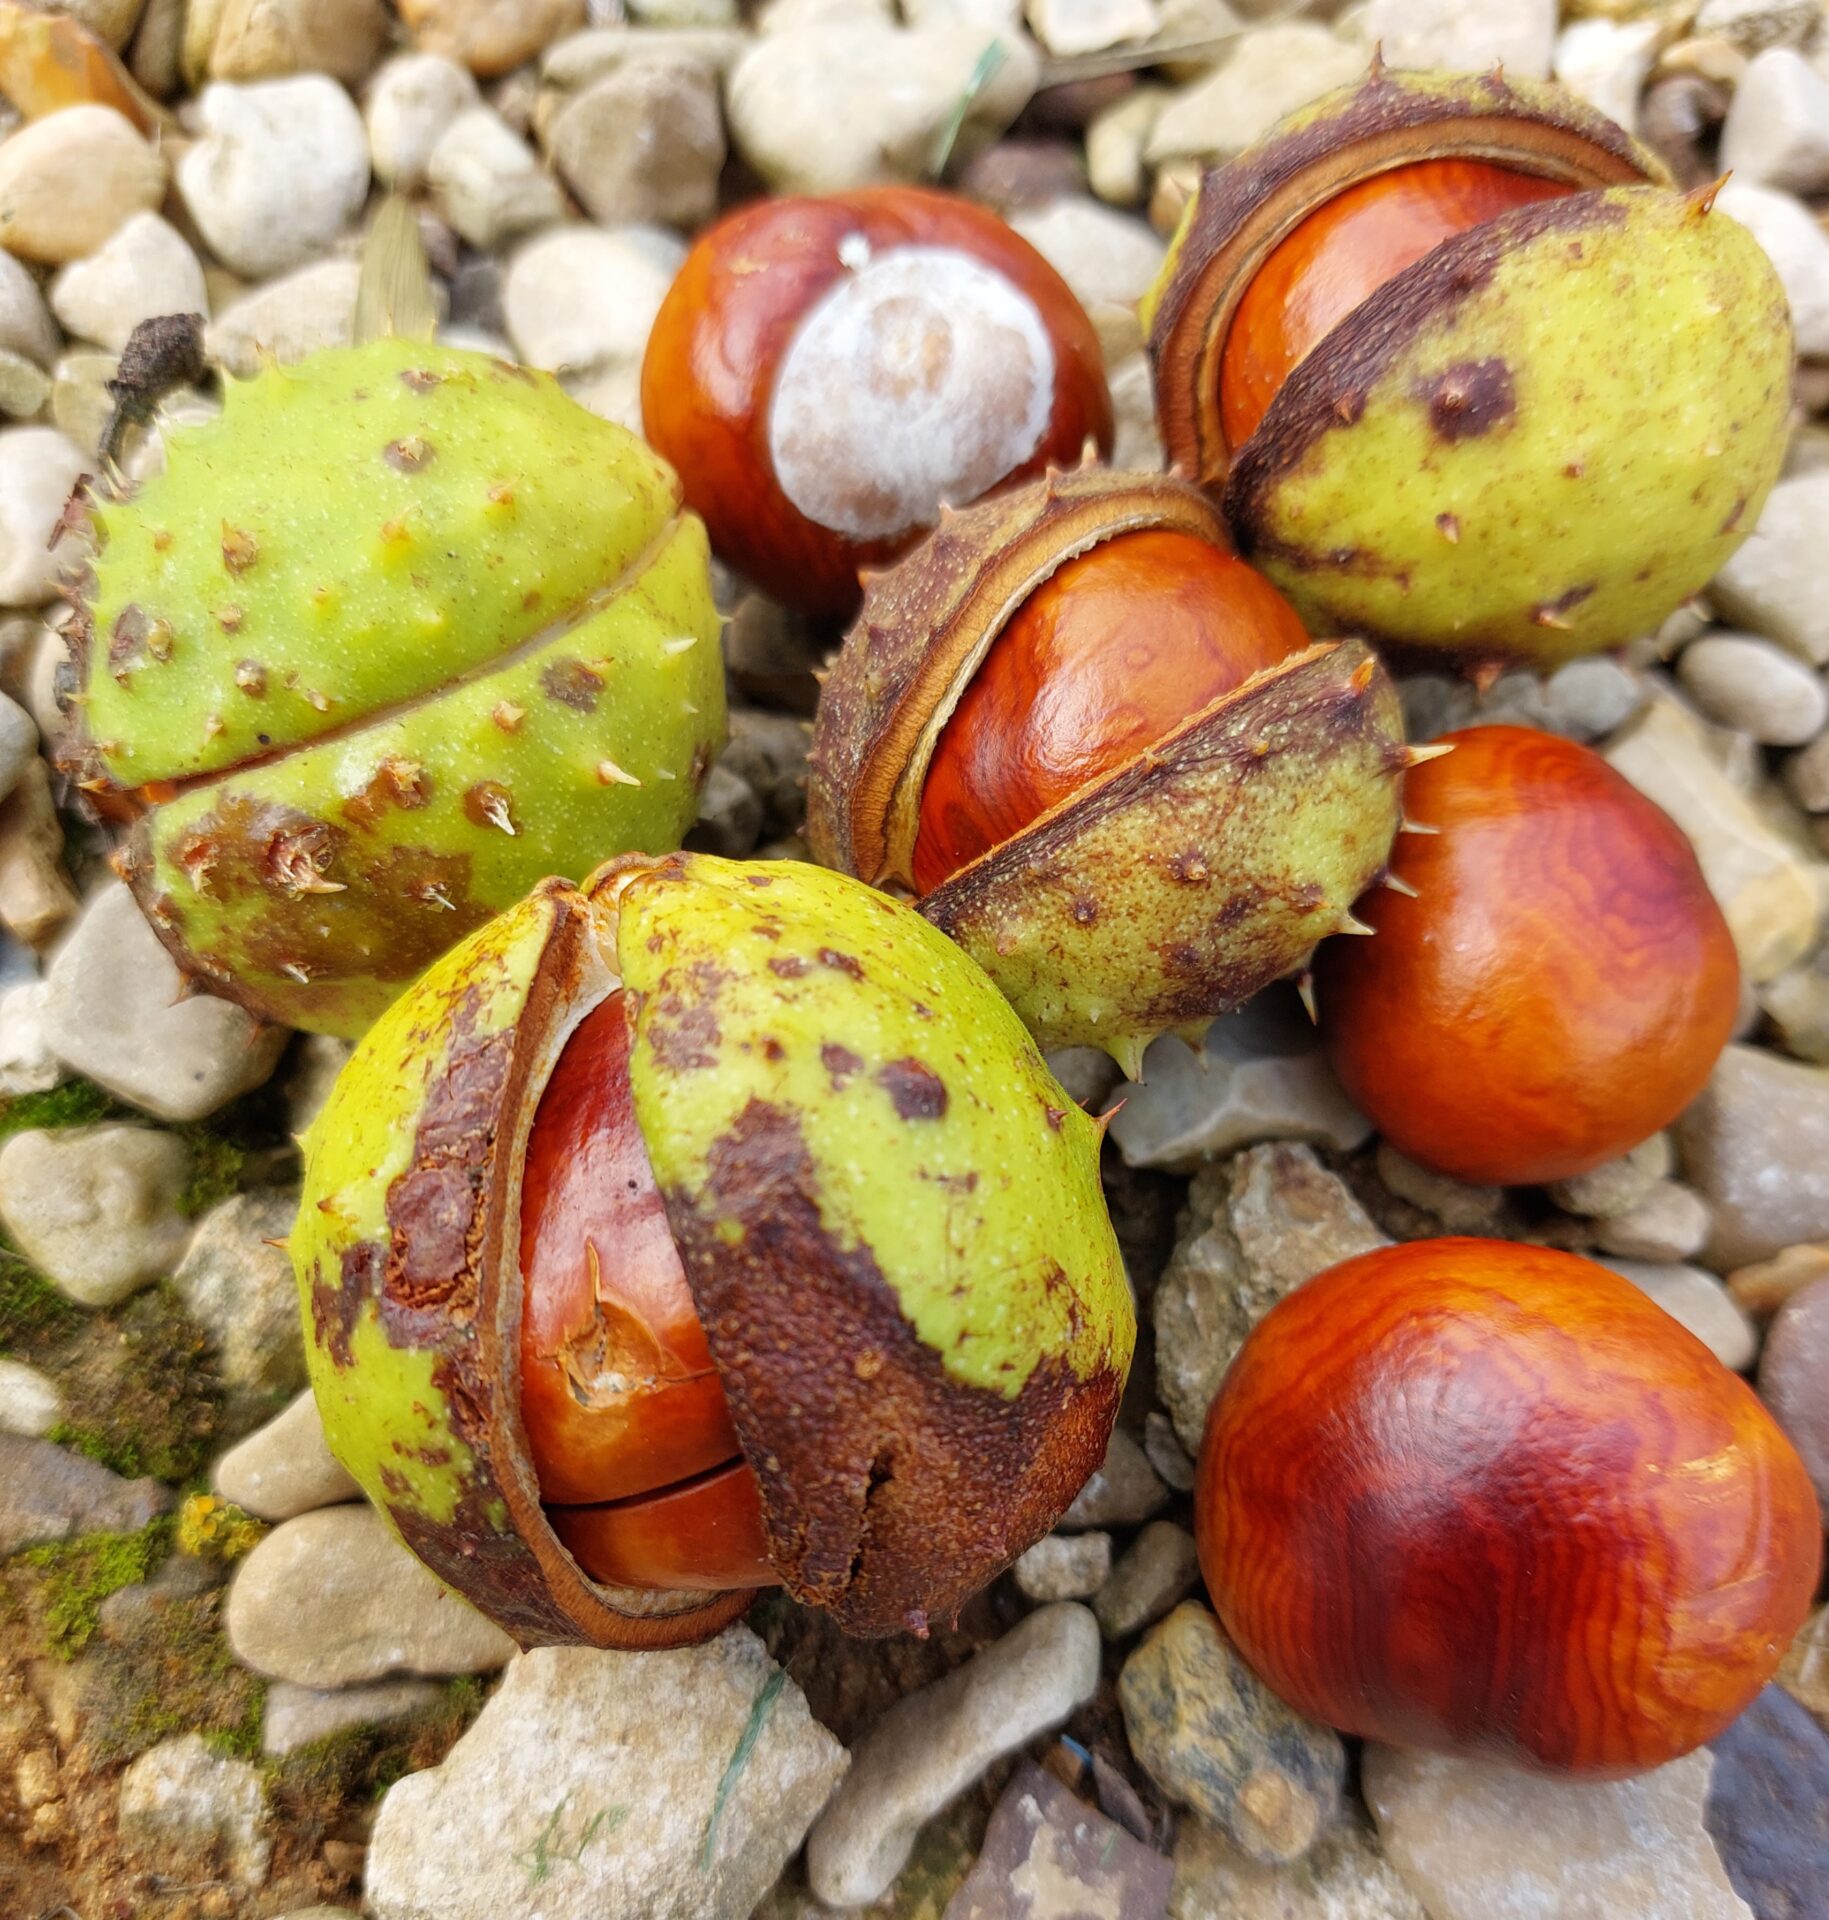 Sustainability aims - using conkers to make detergent